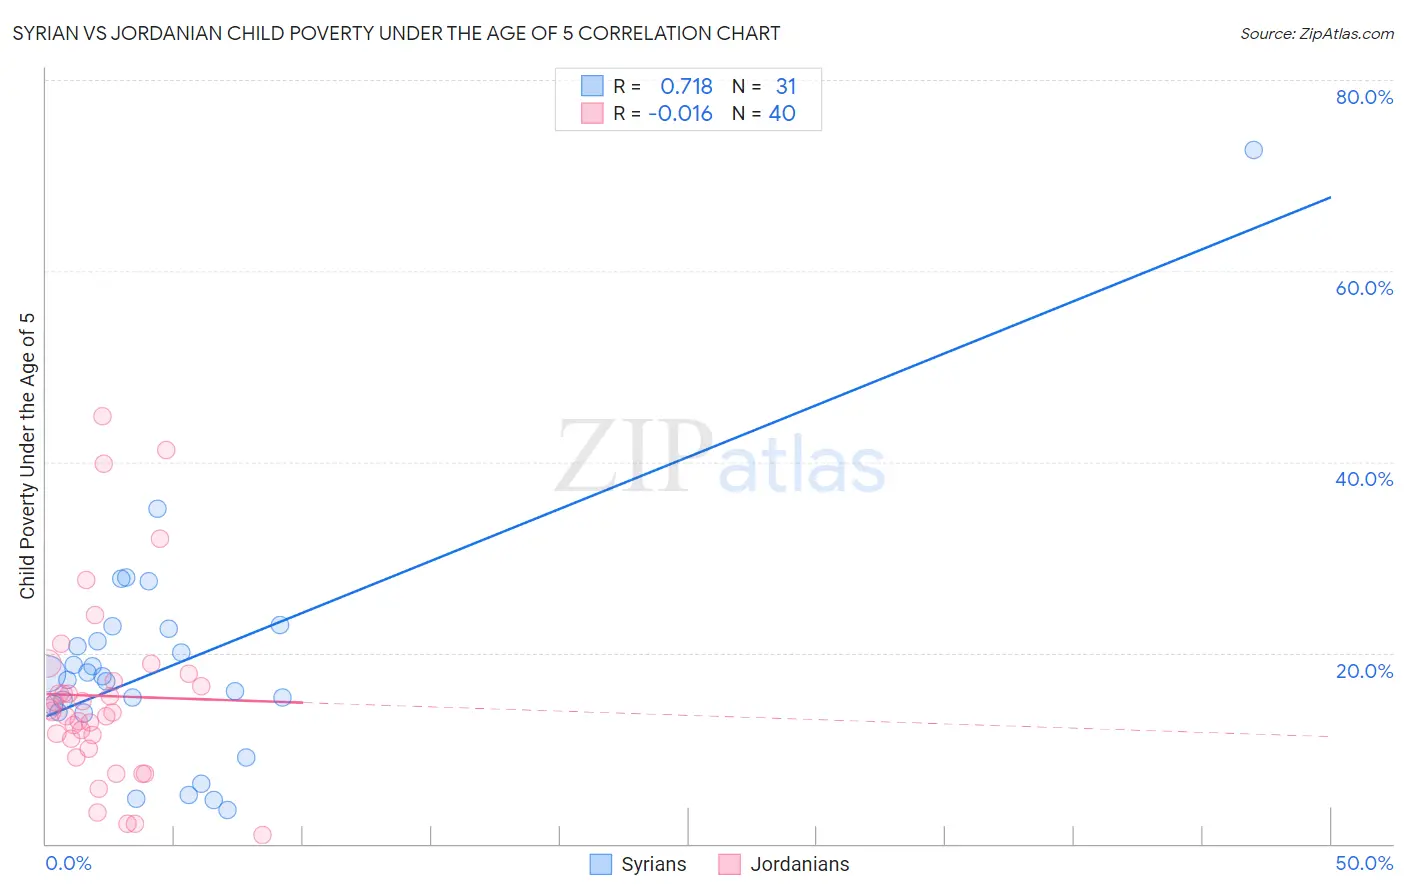 Syrian vs Jordanian Child Poverty Under the Age of 5